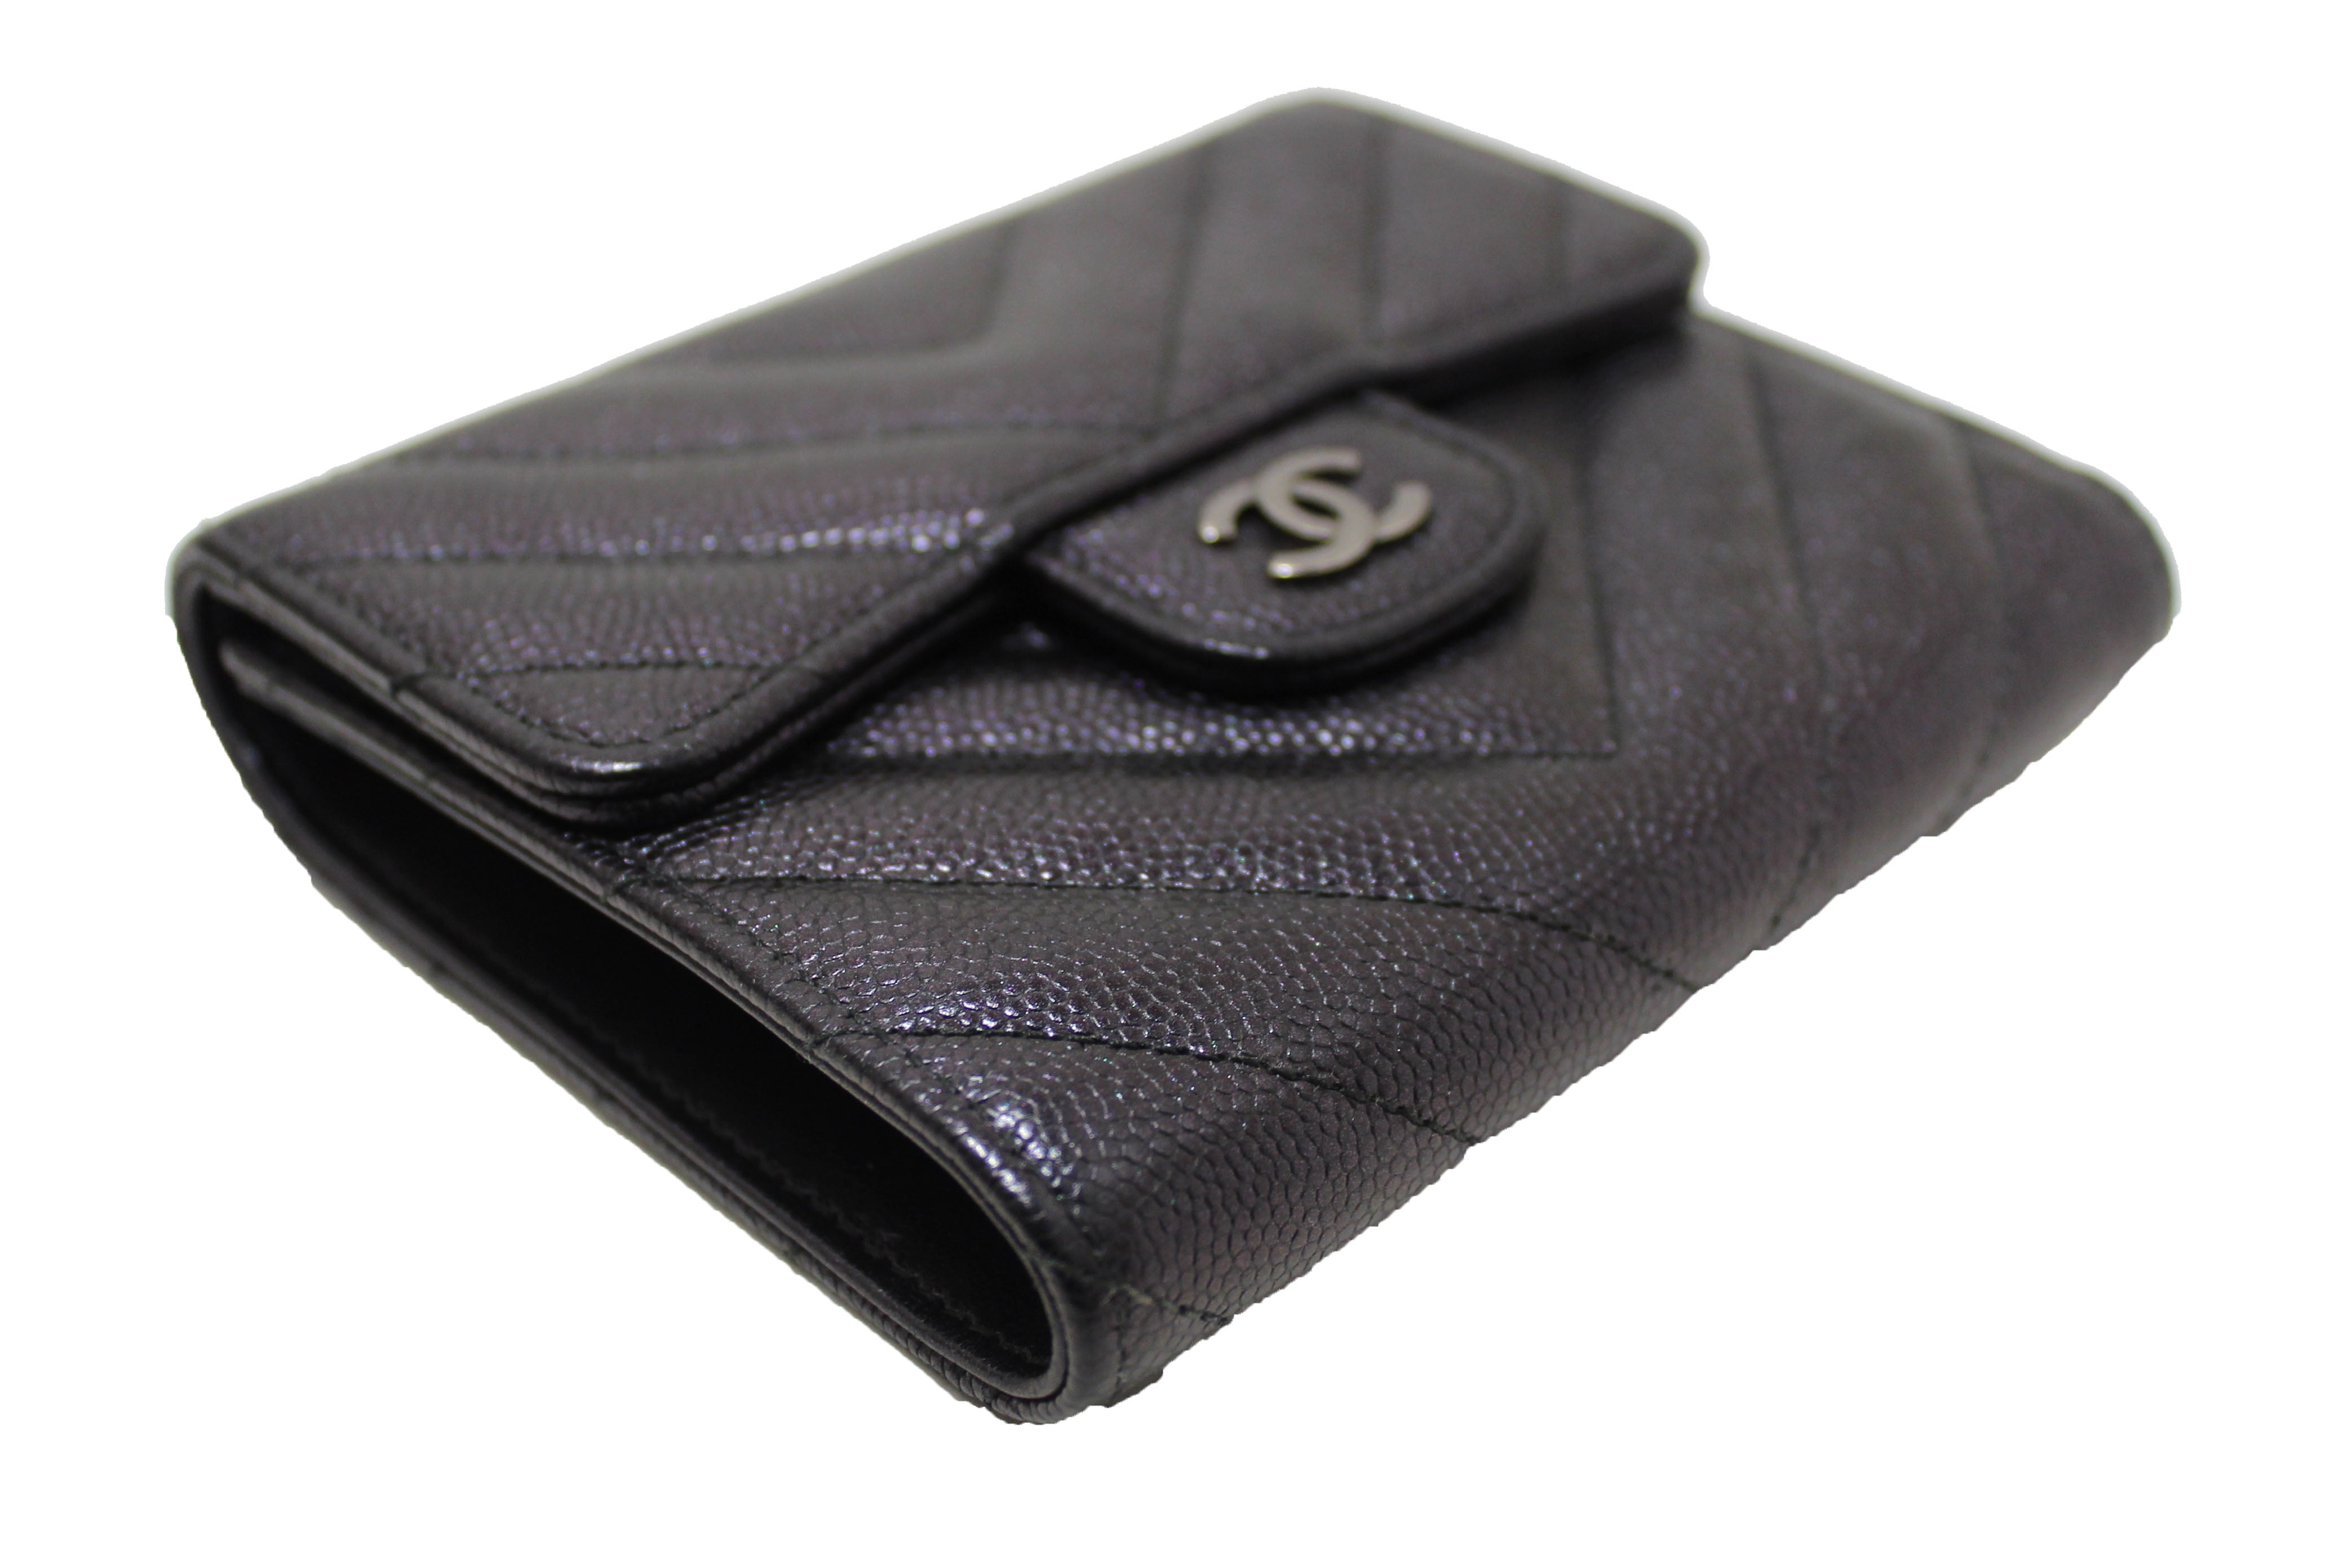 Chanel Chevron Quilted Compact Flap Wallet